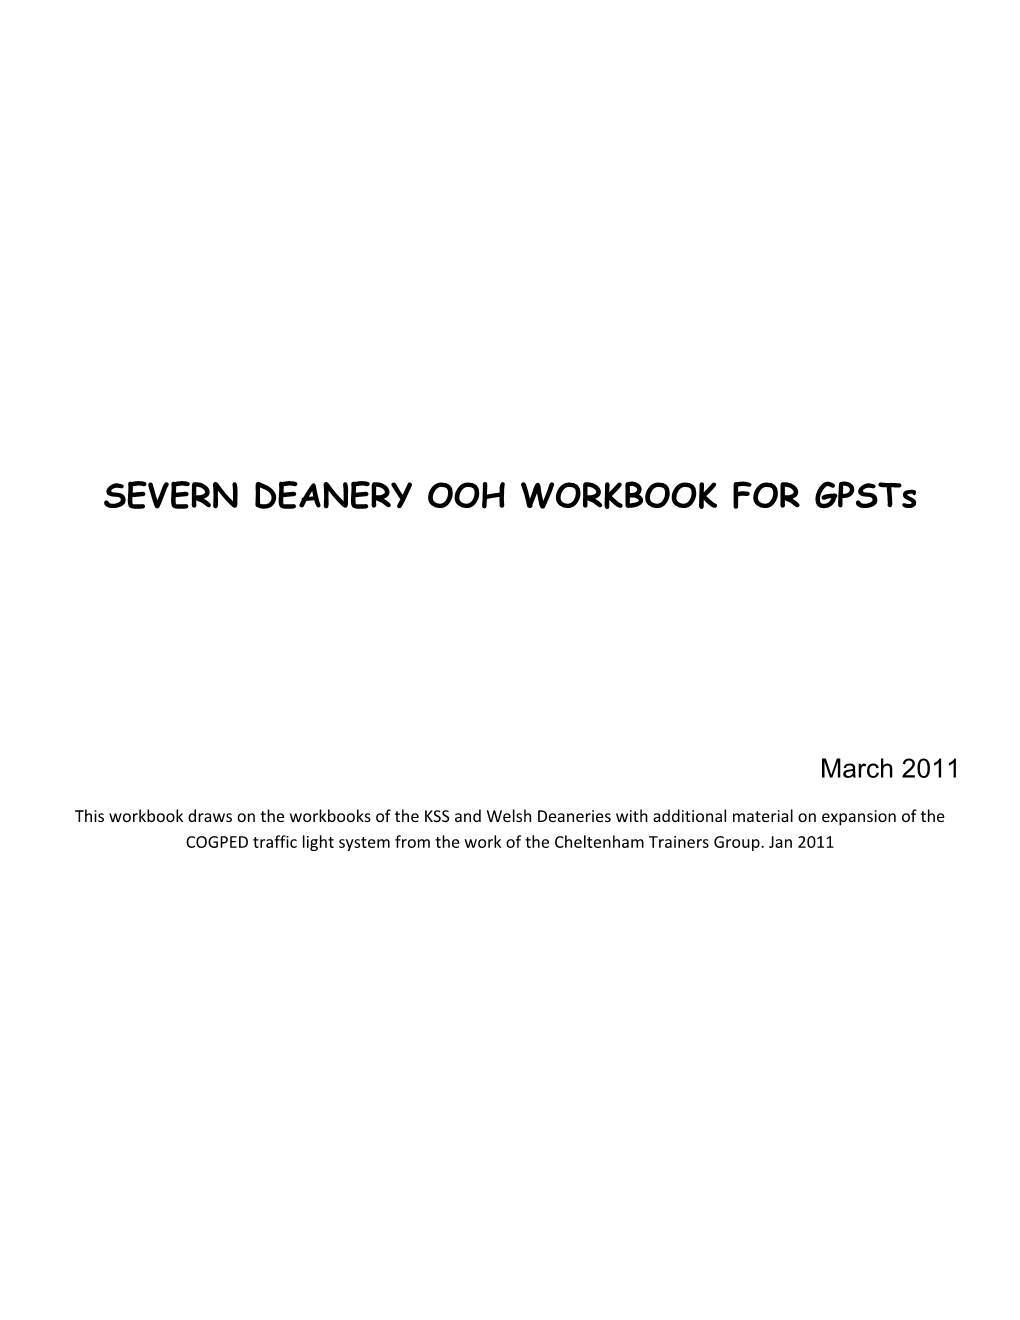 SEVERN DEANERY OOH WORKBOOK for Gpsts